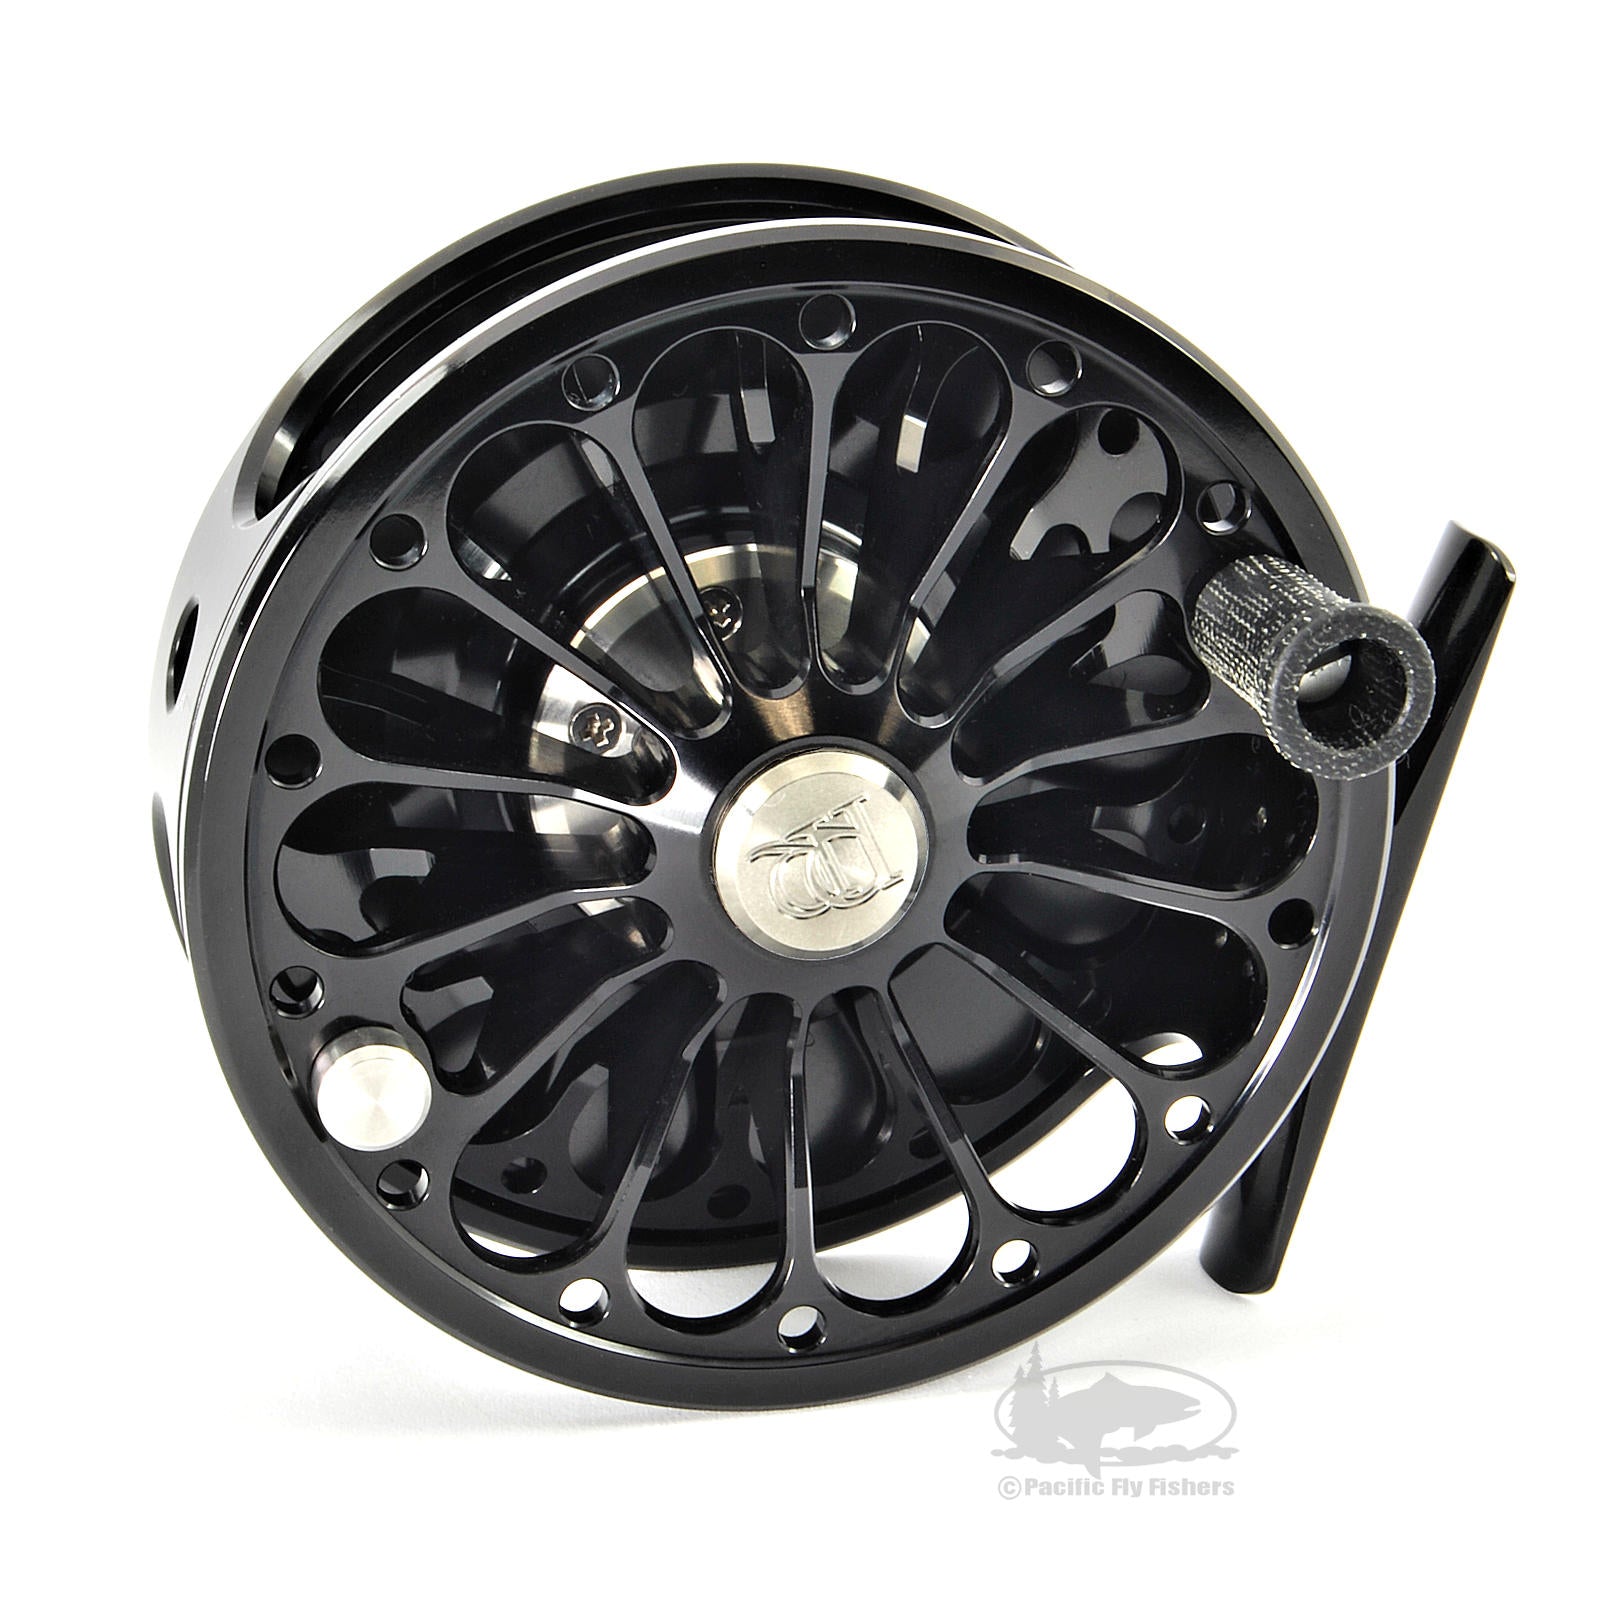 Ross – San Miguel #1 / Reel in a Cure - Classic Tackle Purveyor